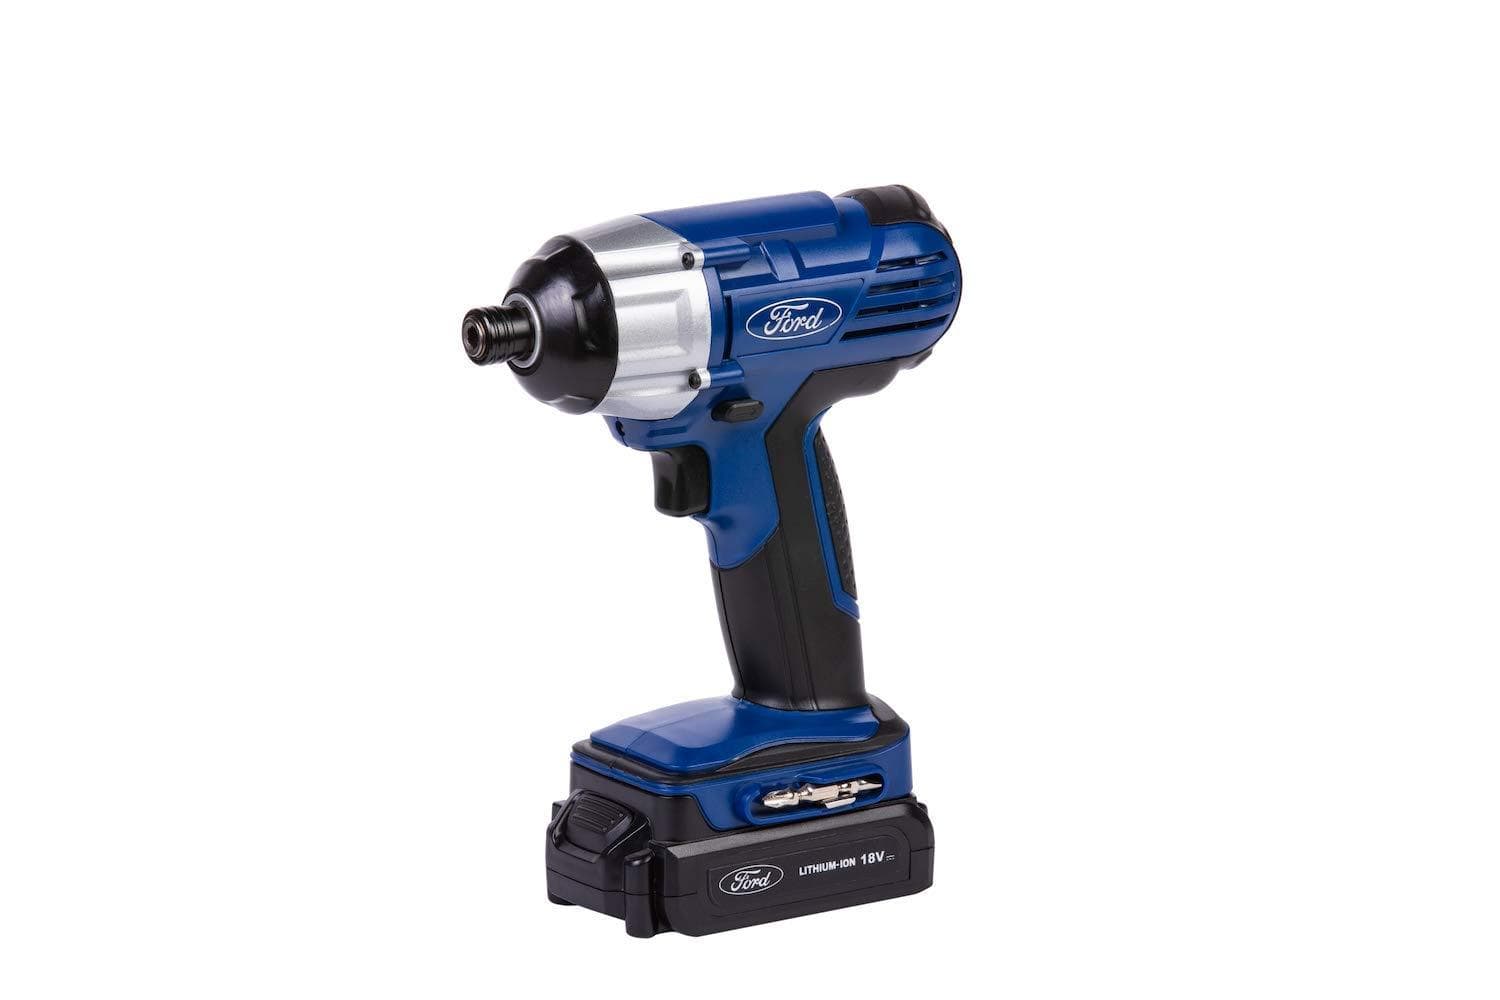 Ford Lithium-Ion Cordless Impact Driver 18V 1.5Ah - F181-60 | Supply Master | Accra, Ghana Tools Building Steel Engineering Hardware tool